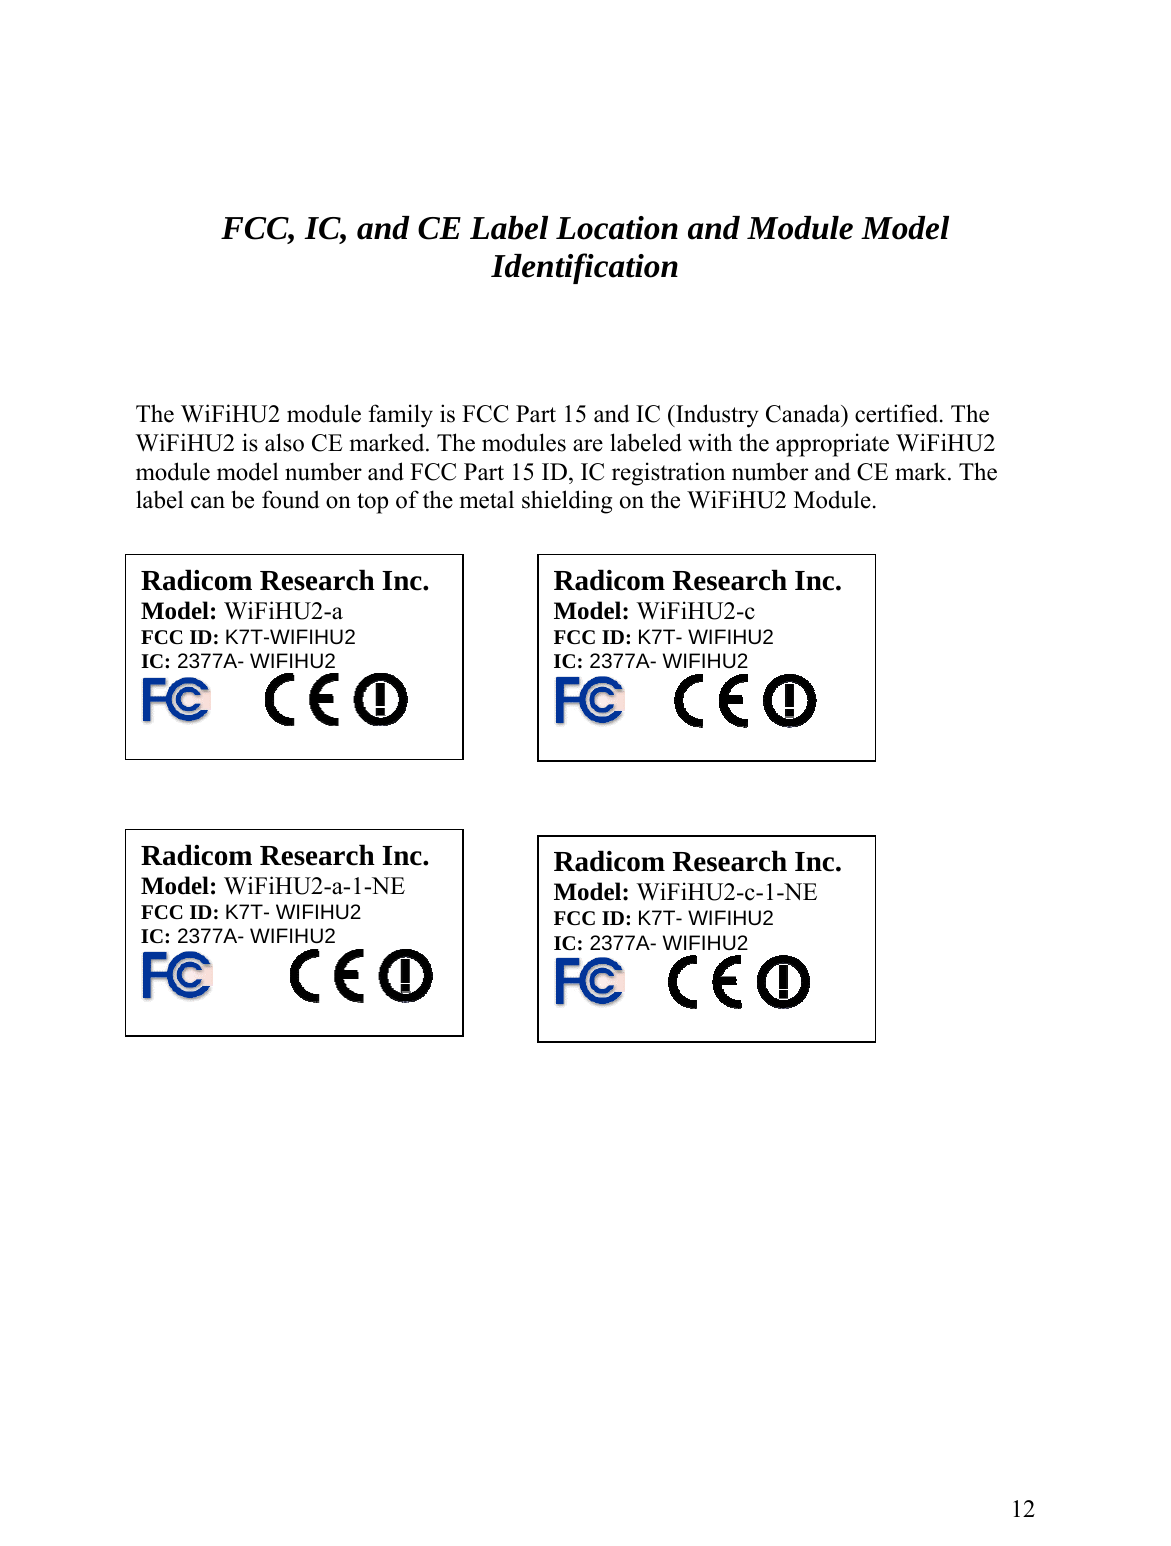    FCC, IC, and CE Label Location and Module Model ion  WiFiHU2 miHU he modules are labeled with the appropriate WiFiHU2 ber and FCC Part 15 ID, IC registration number and CE mark. The l ca n top of the metal shielding on the WiFiHU2 Module.                 Identificat  The  odule family is FCC Part 15 and IC (Industry Canada) certified. The WiF 2 is also CE marked. Tmodule model numlabe n be found o  Ra odic m Research Inc. FCC ID: 2377A- WIFIHU2 Radicom Research Inc.  IC: 2377A- WIFIHU2 Model: WiFiHU2-a  K7T-WIFIHU2 Model: WiFiHU2-c FCC ID: K7T- WIFIHU2IC: RMadicom Research Inc. odel: WiFiHU2-a-1-NE FCC ID: K7T- WIFIHU2 IC: 2377A- WIFIHU2      Radicom Research Inc. Model: WiFiHU2-c-1-NE FCC ID: K7T- WIFIHU2 IC: 2377A- WIFIHU2                                12 